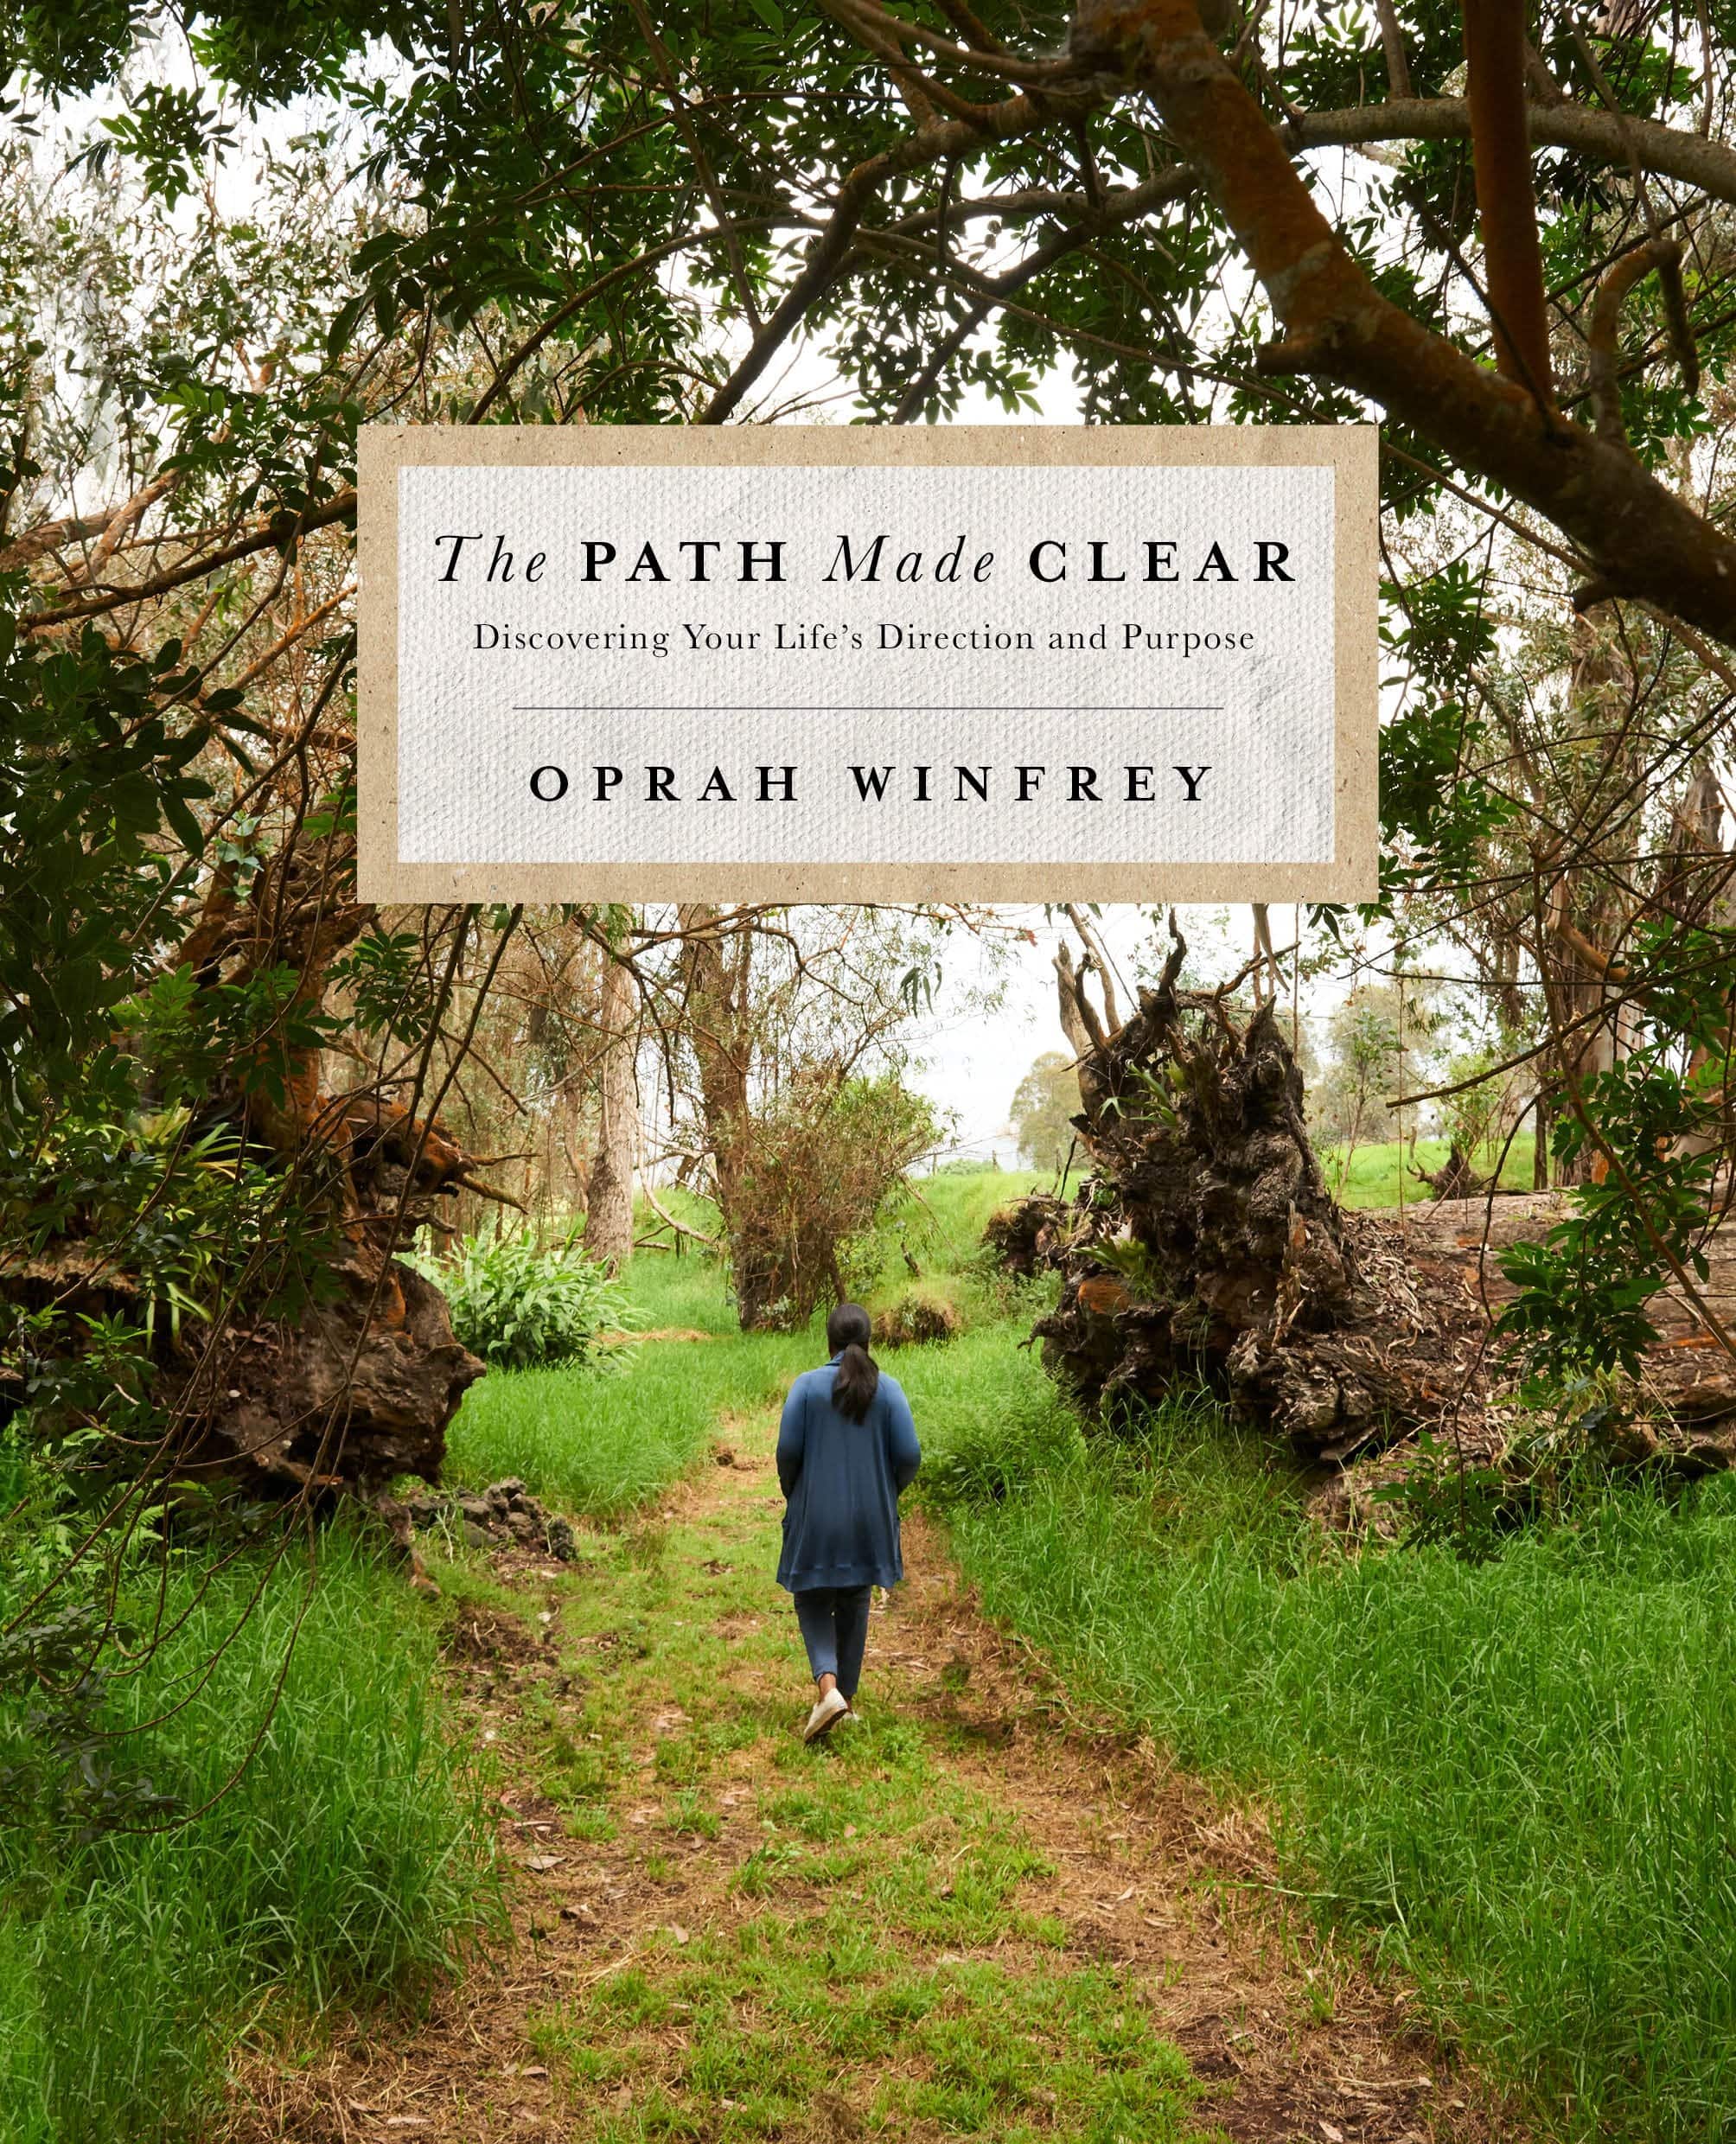 Best Gifts For Sisters 2022: The Path Made Clear by Oprah 2022